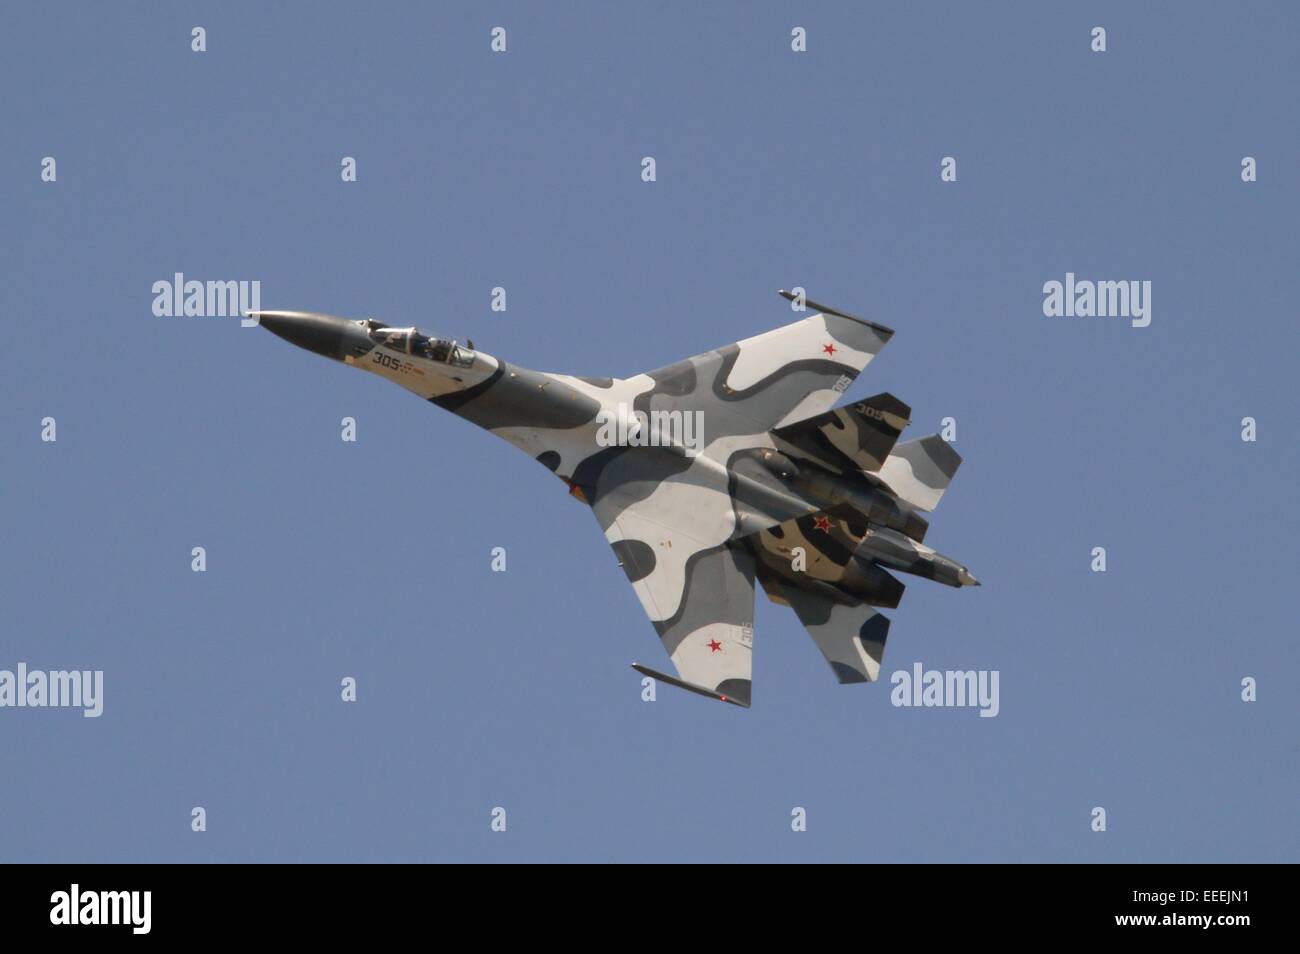 Russian fighter aircraft Sukhoi Su-27 SMK 'Flanker' Stock Photo